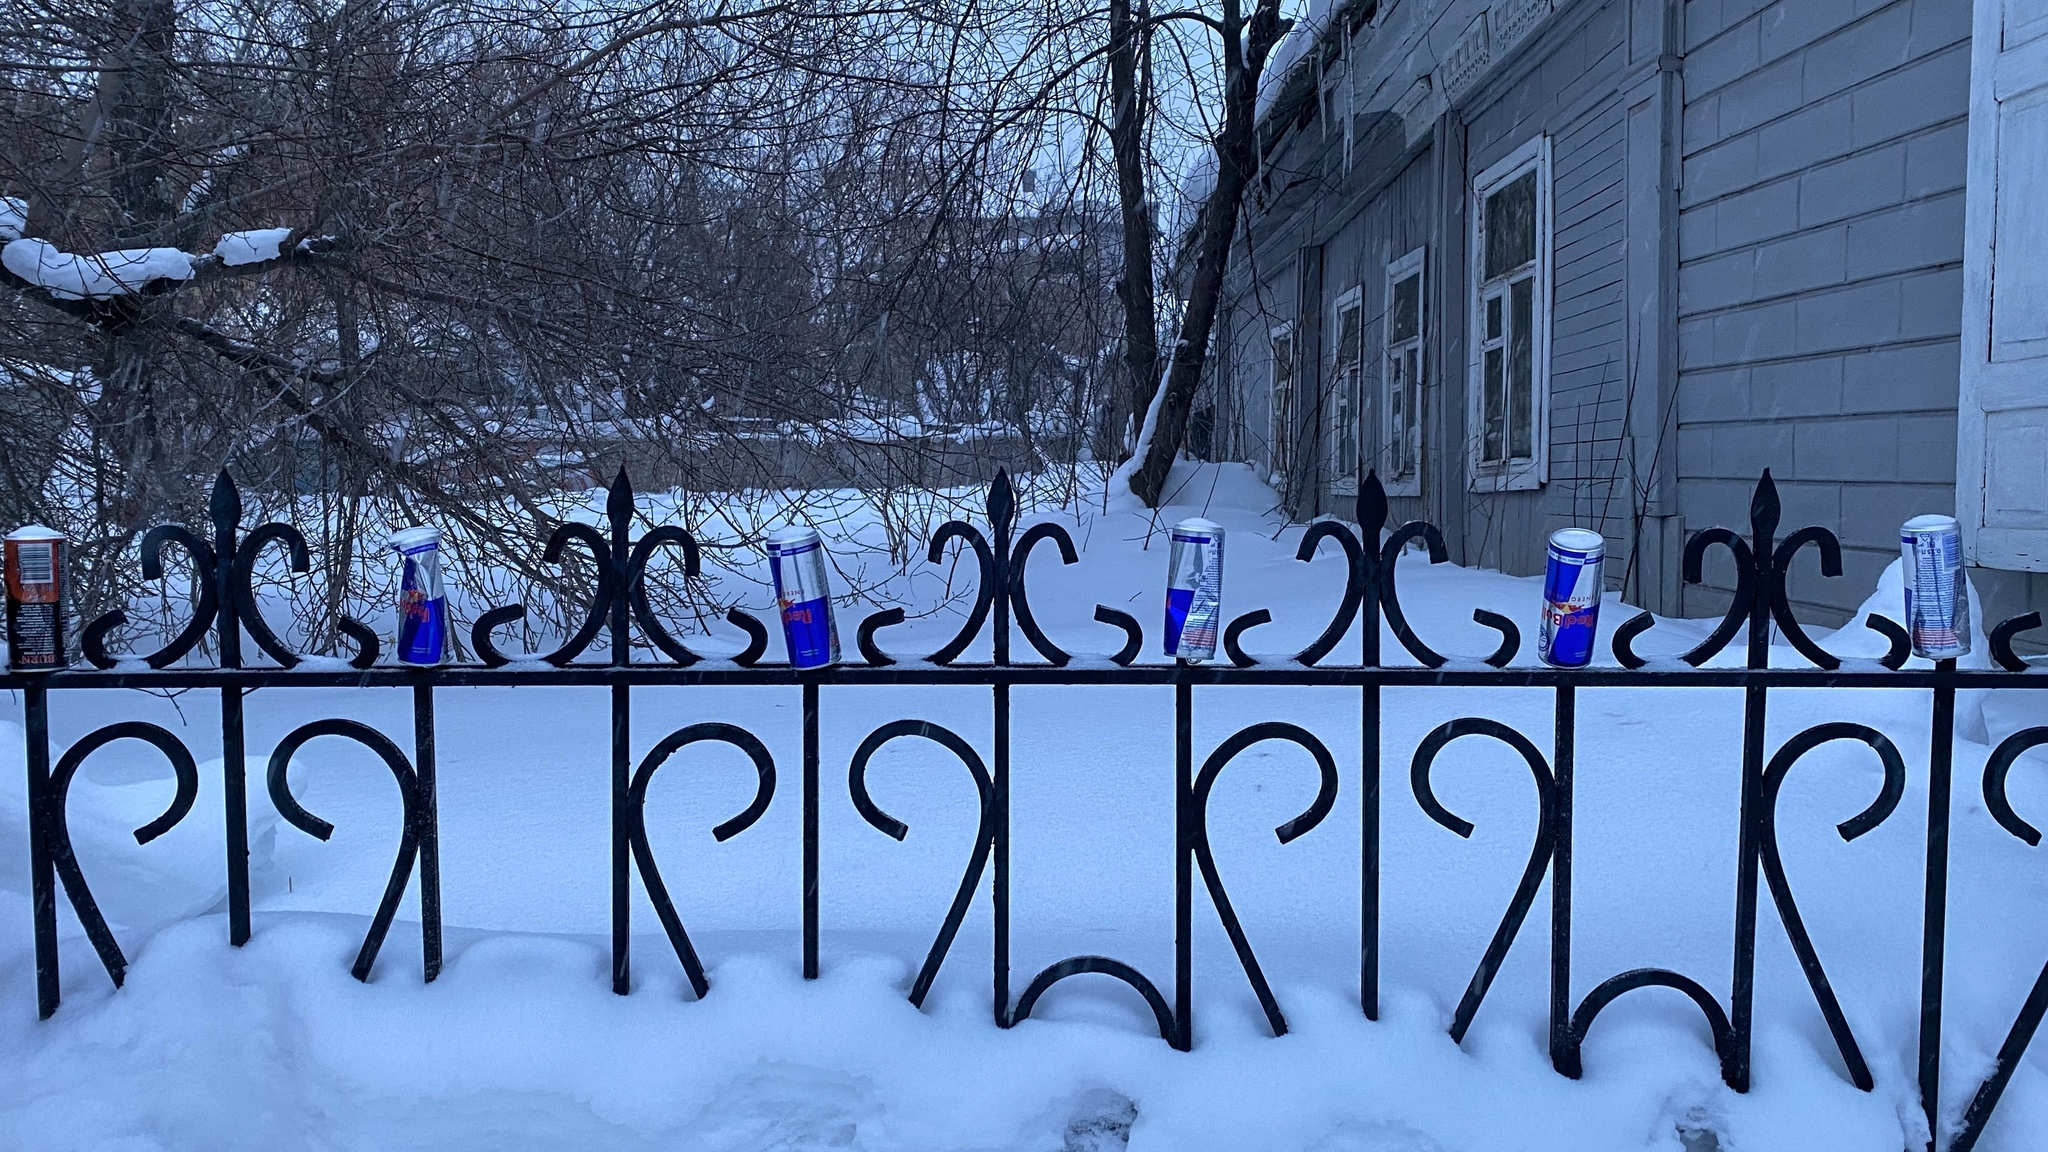 Idiocy or art? - My, Idiocy, Fence, Winter, Snow, Energy